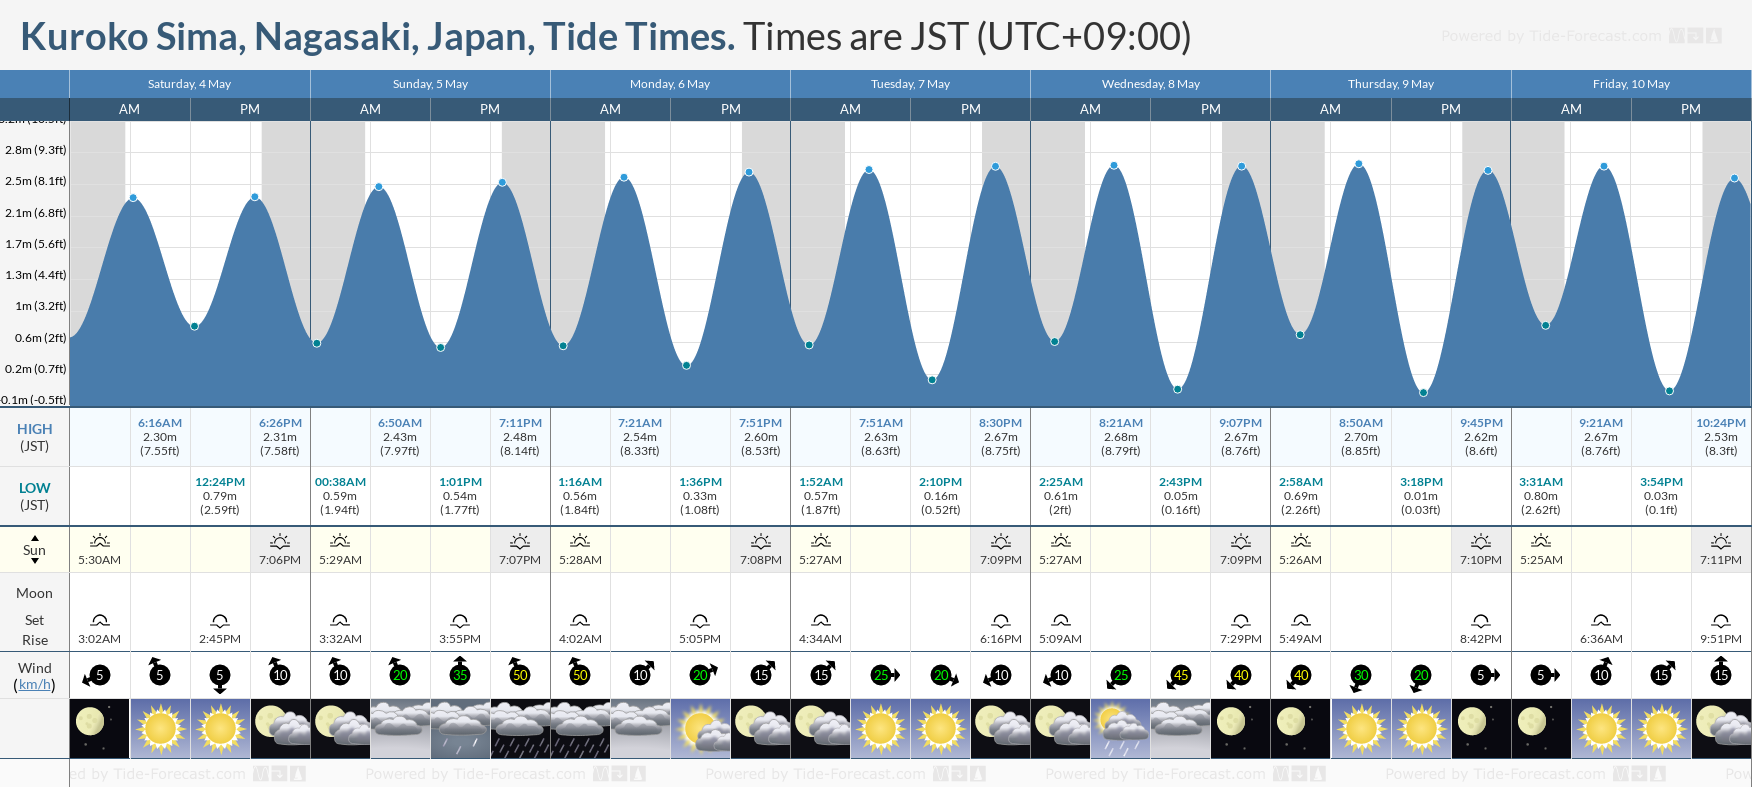 Kuroko Sima, Nagasaki, Japan Tide Chart including high and low tide times for the next 7 days